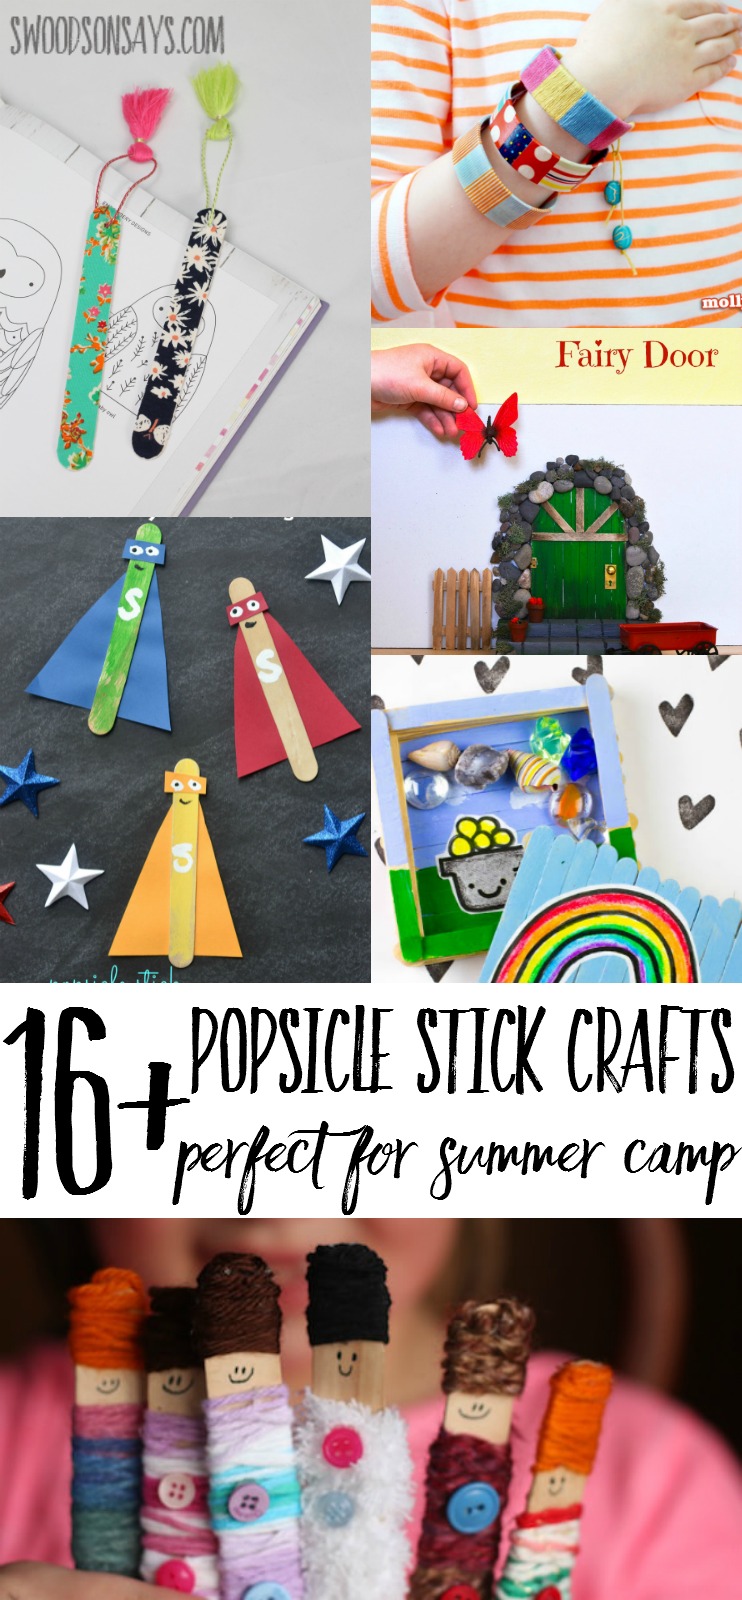 Craft sticks are the perfect craft supply for summer camp - cheap and fun! Here's a list of popsicle stick crafts for summer camps - get some friends together and get crafty! 